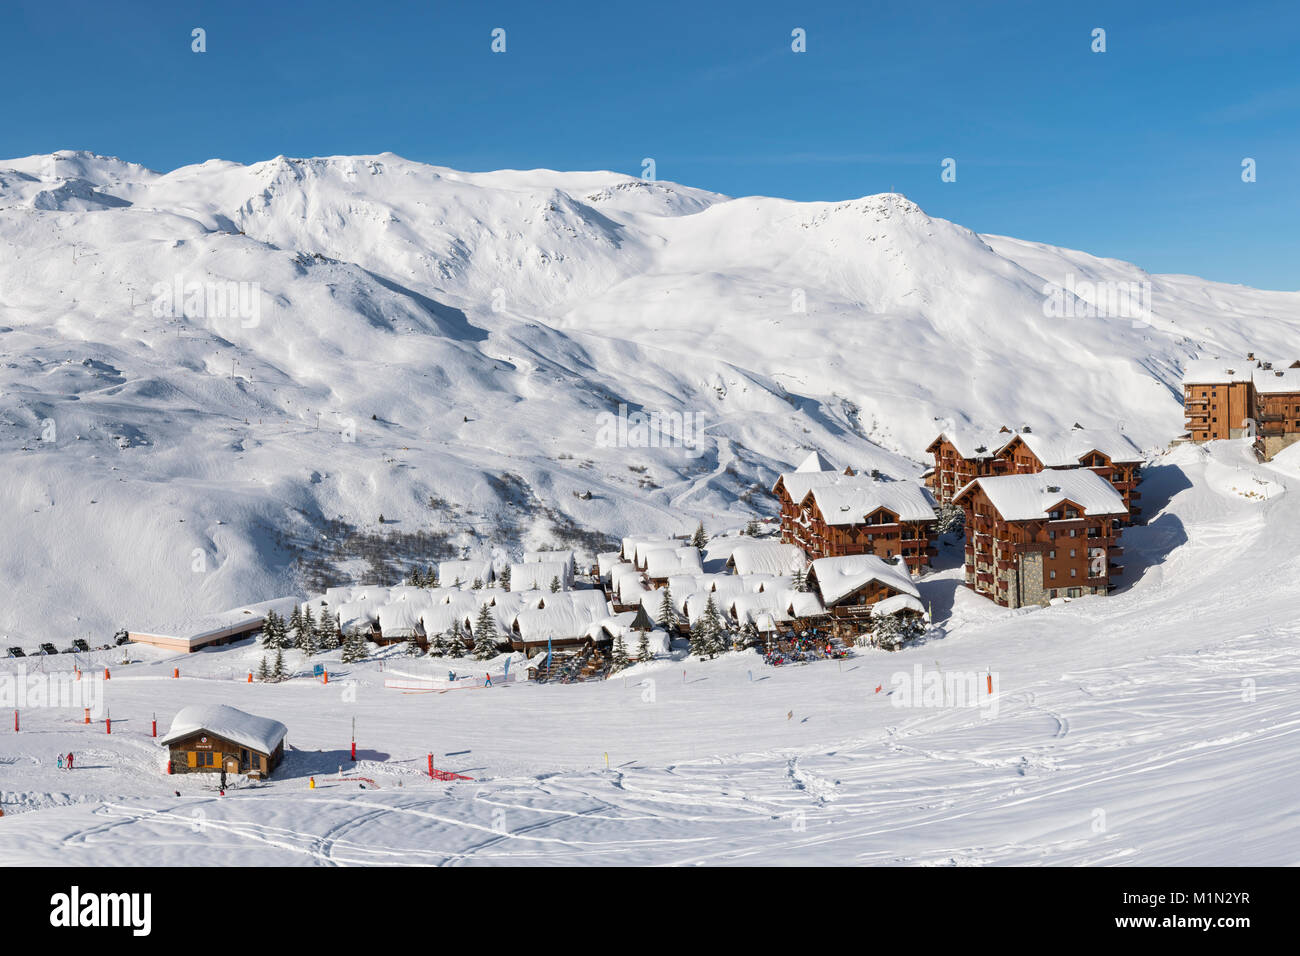 Chalets, hotels and restaurants in the Reberty area of the French ski resort of Les Menuires in the Three Valleys ski area. Stock Photo